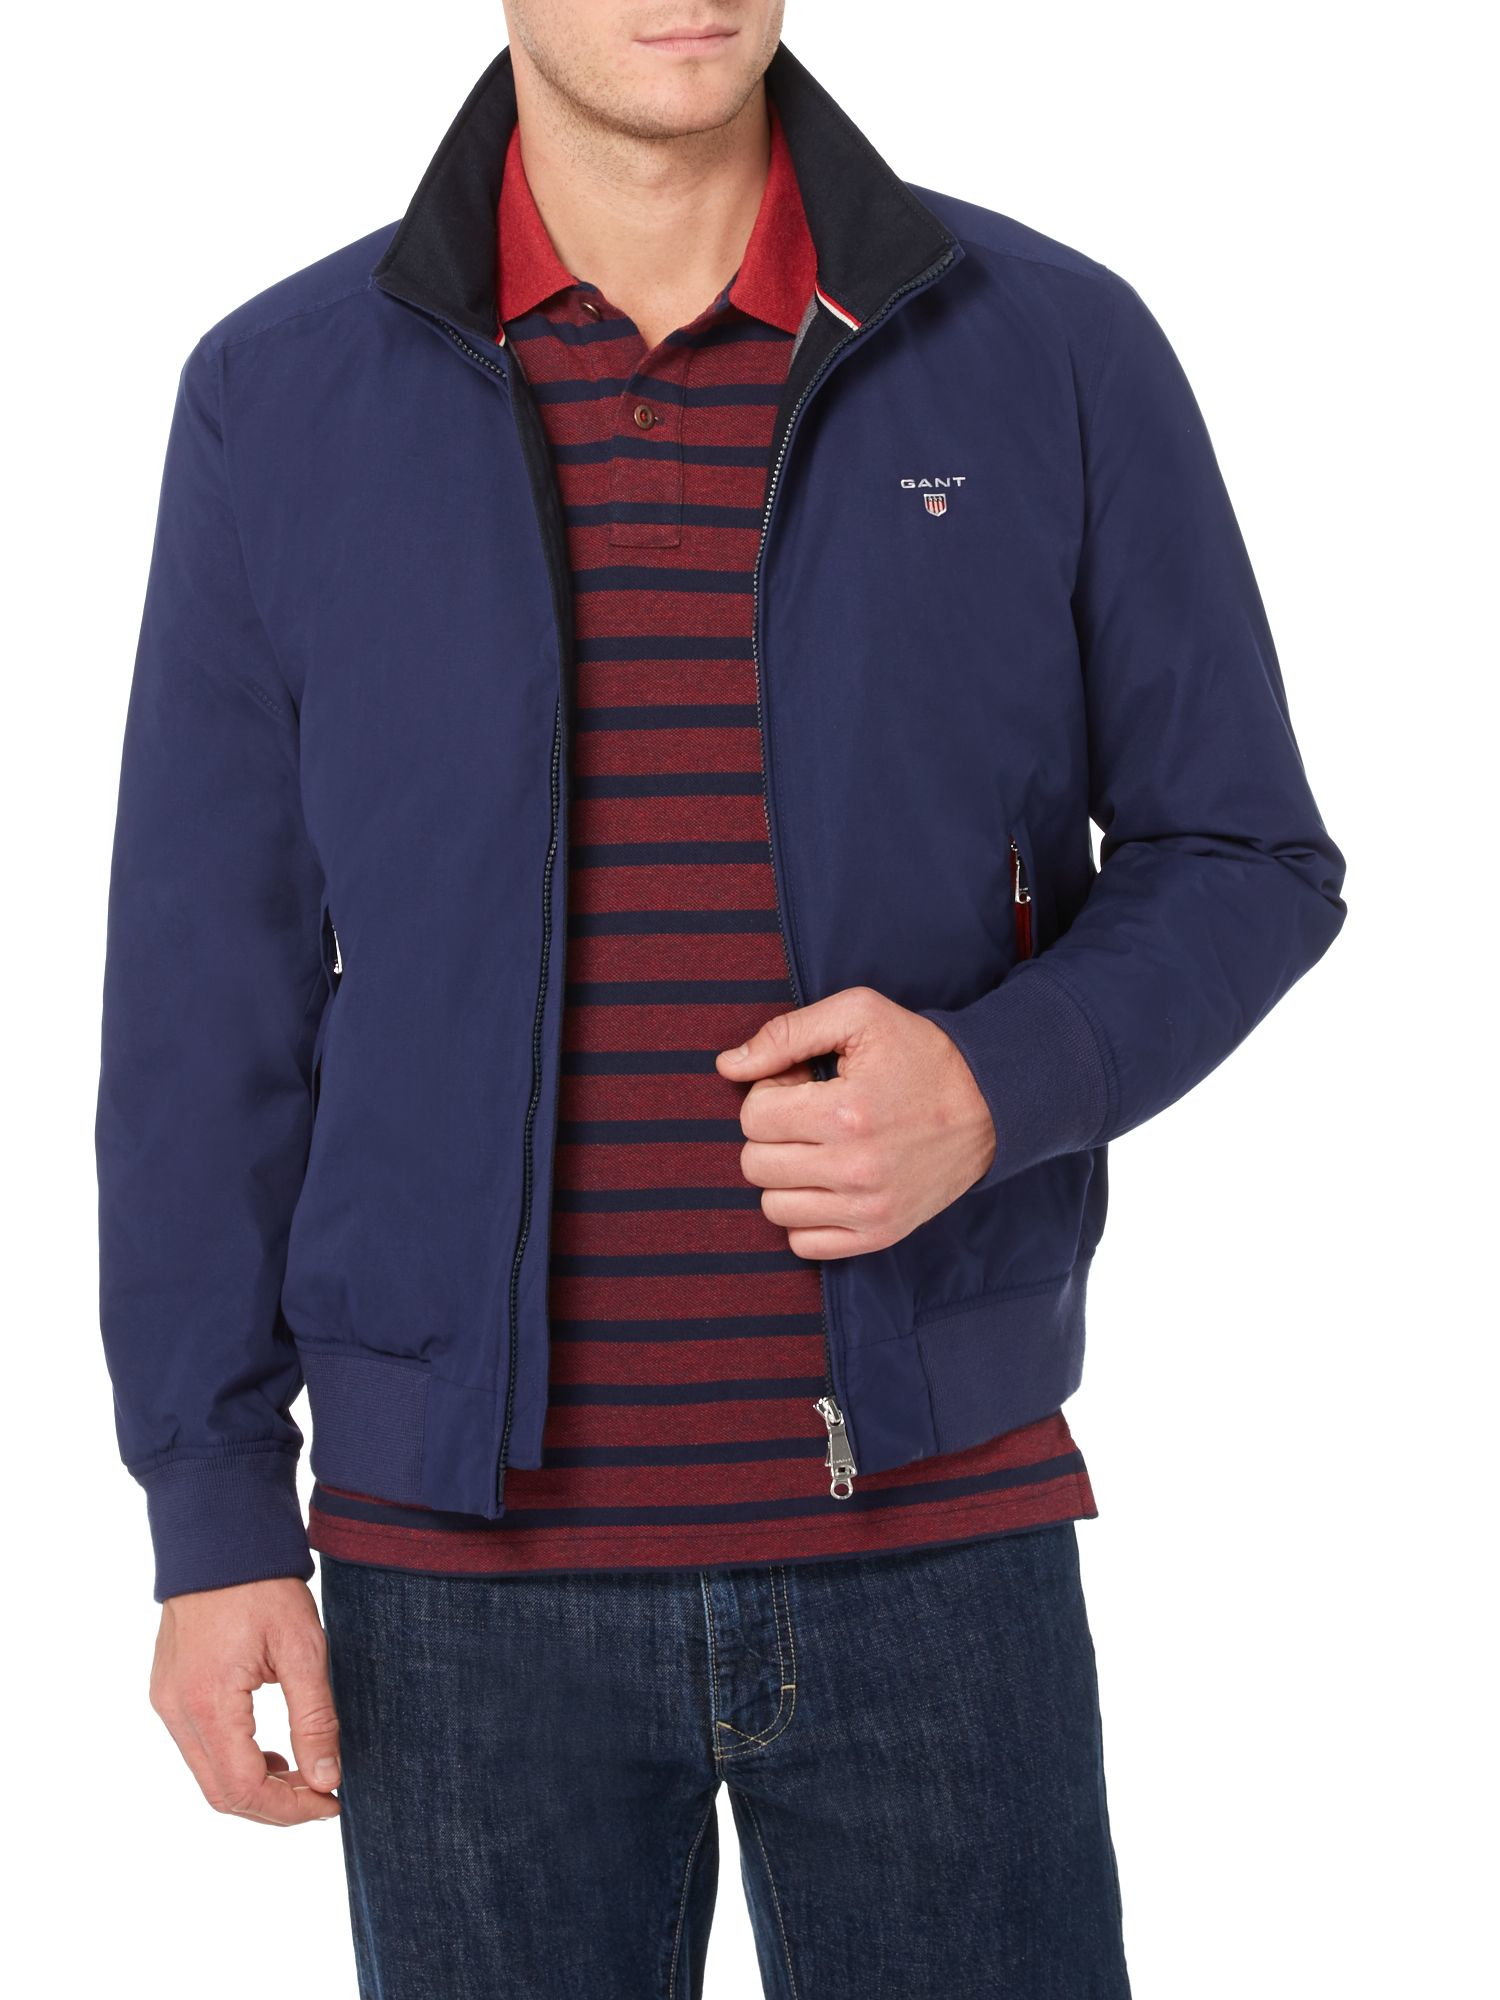 GANT Synthetic New Hampshire Jacket in Dark Blue (Blue) for Men - Lyst